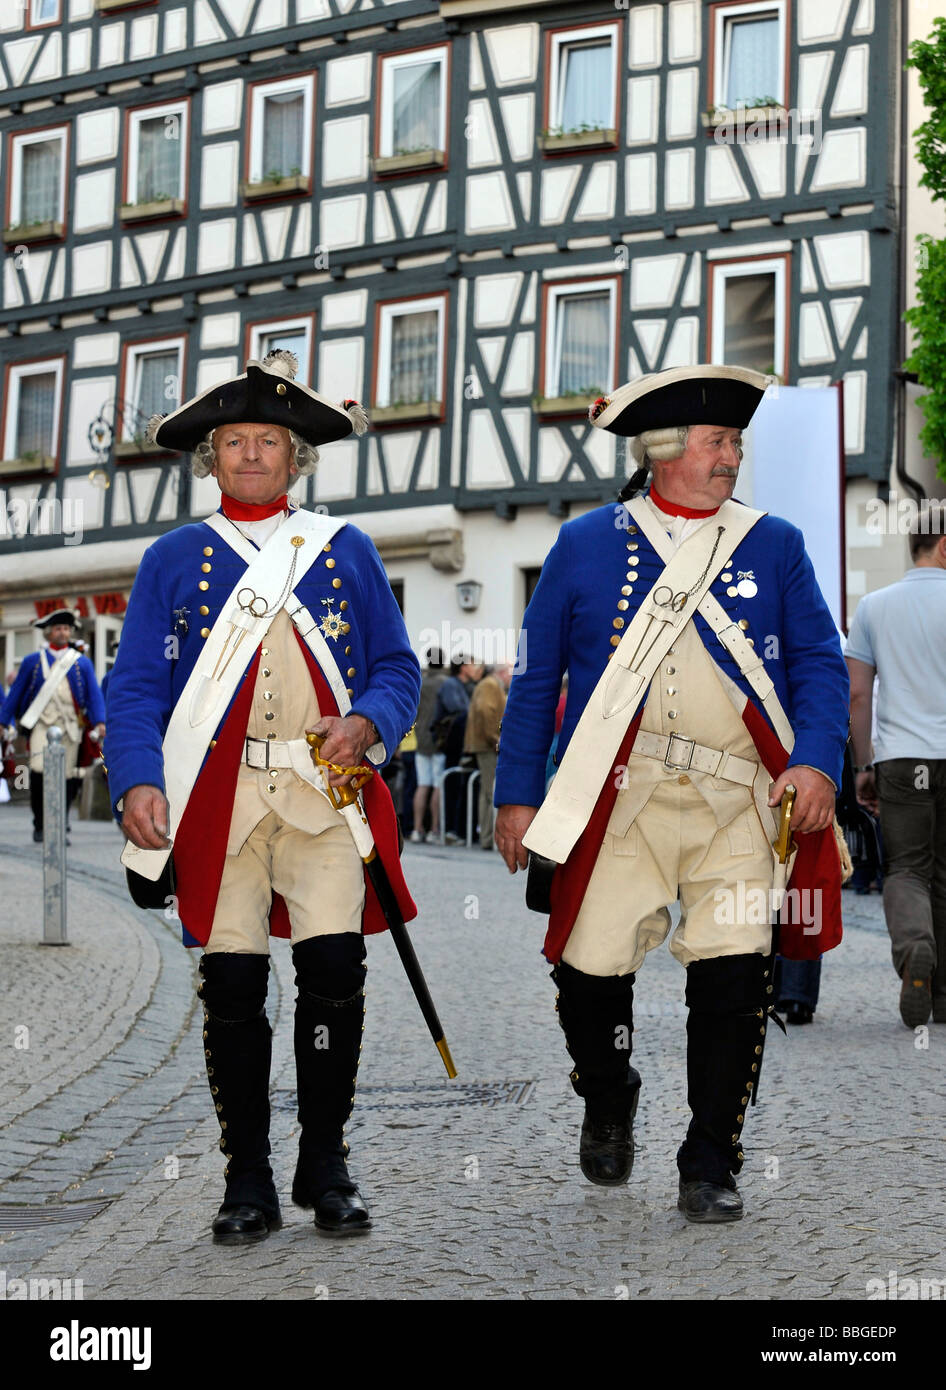 Life in the Baroque era, 18th century, Prussian uniform at the time of Frederick II of Prussia, Schiller Jahrhundertfest festiv Stock Photo